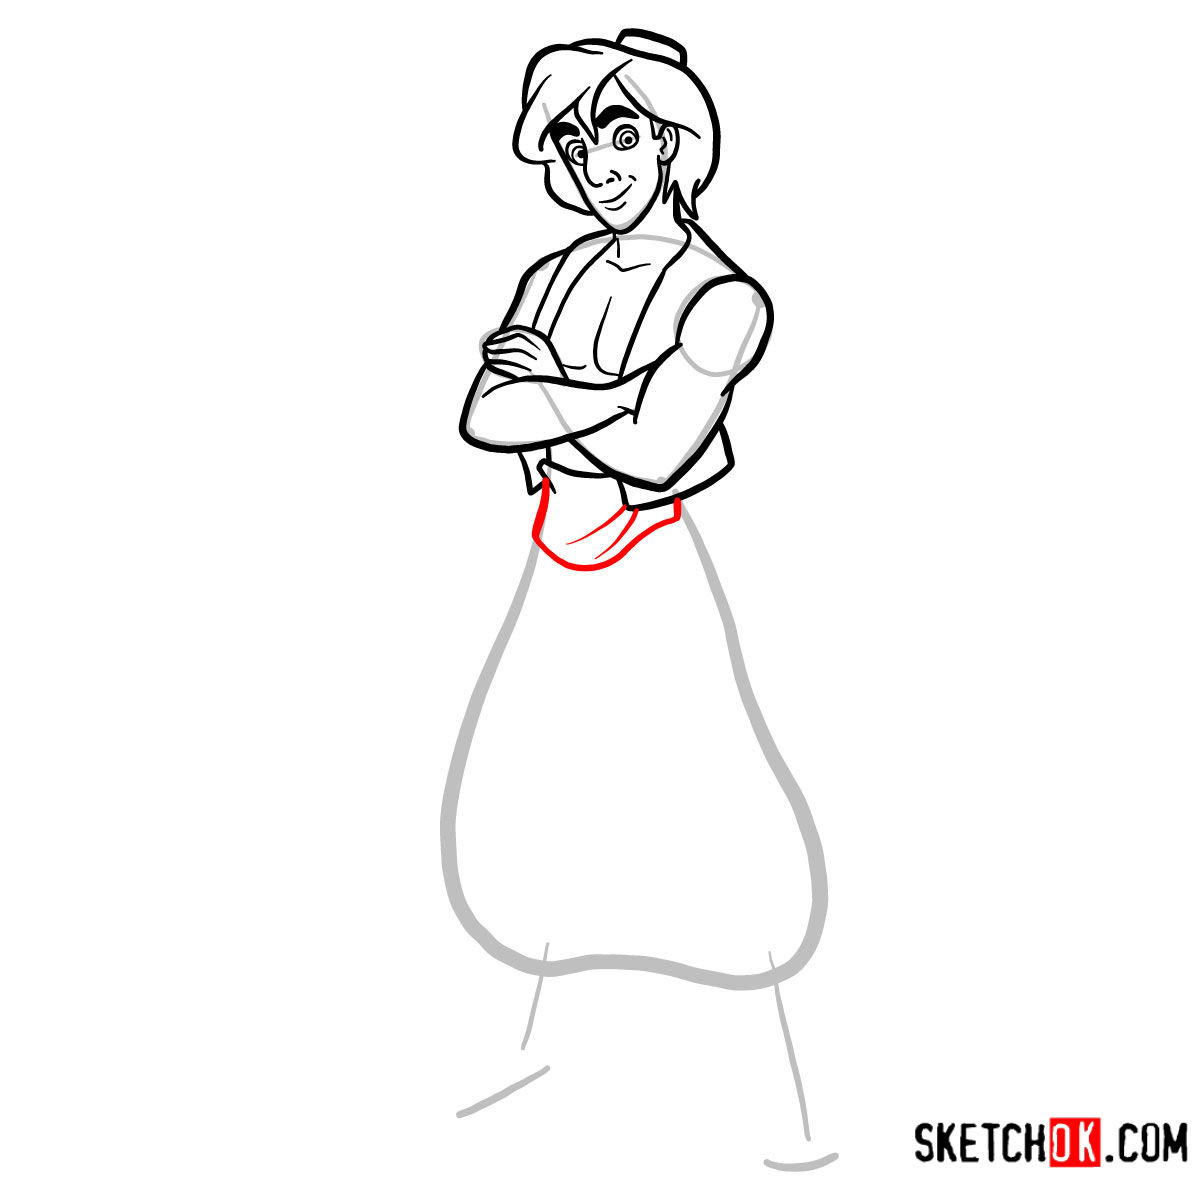 How to draw Aladdin from Disney's animated series - step 09